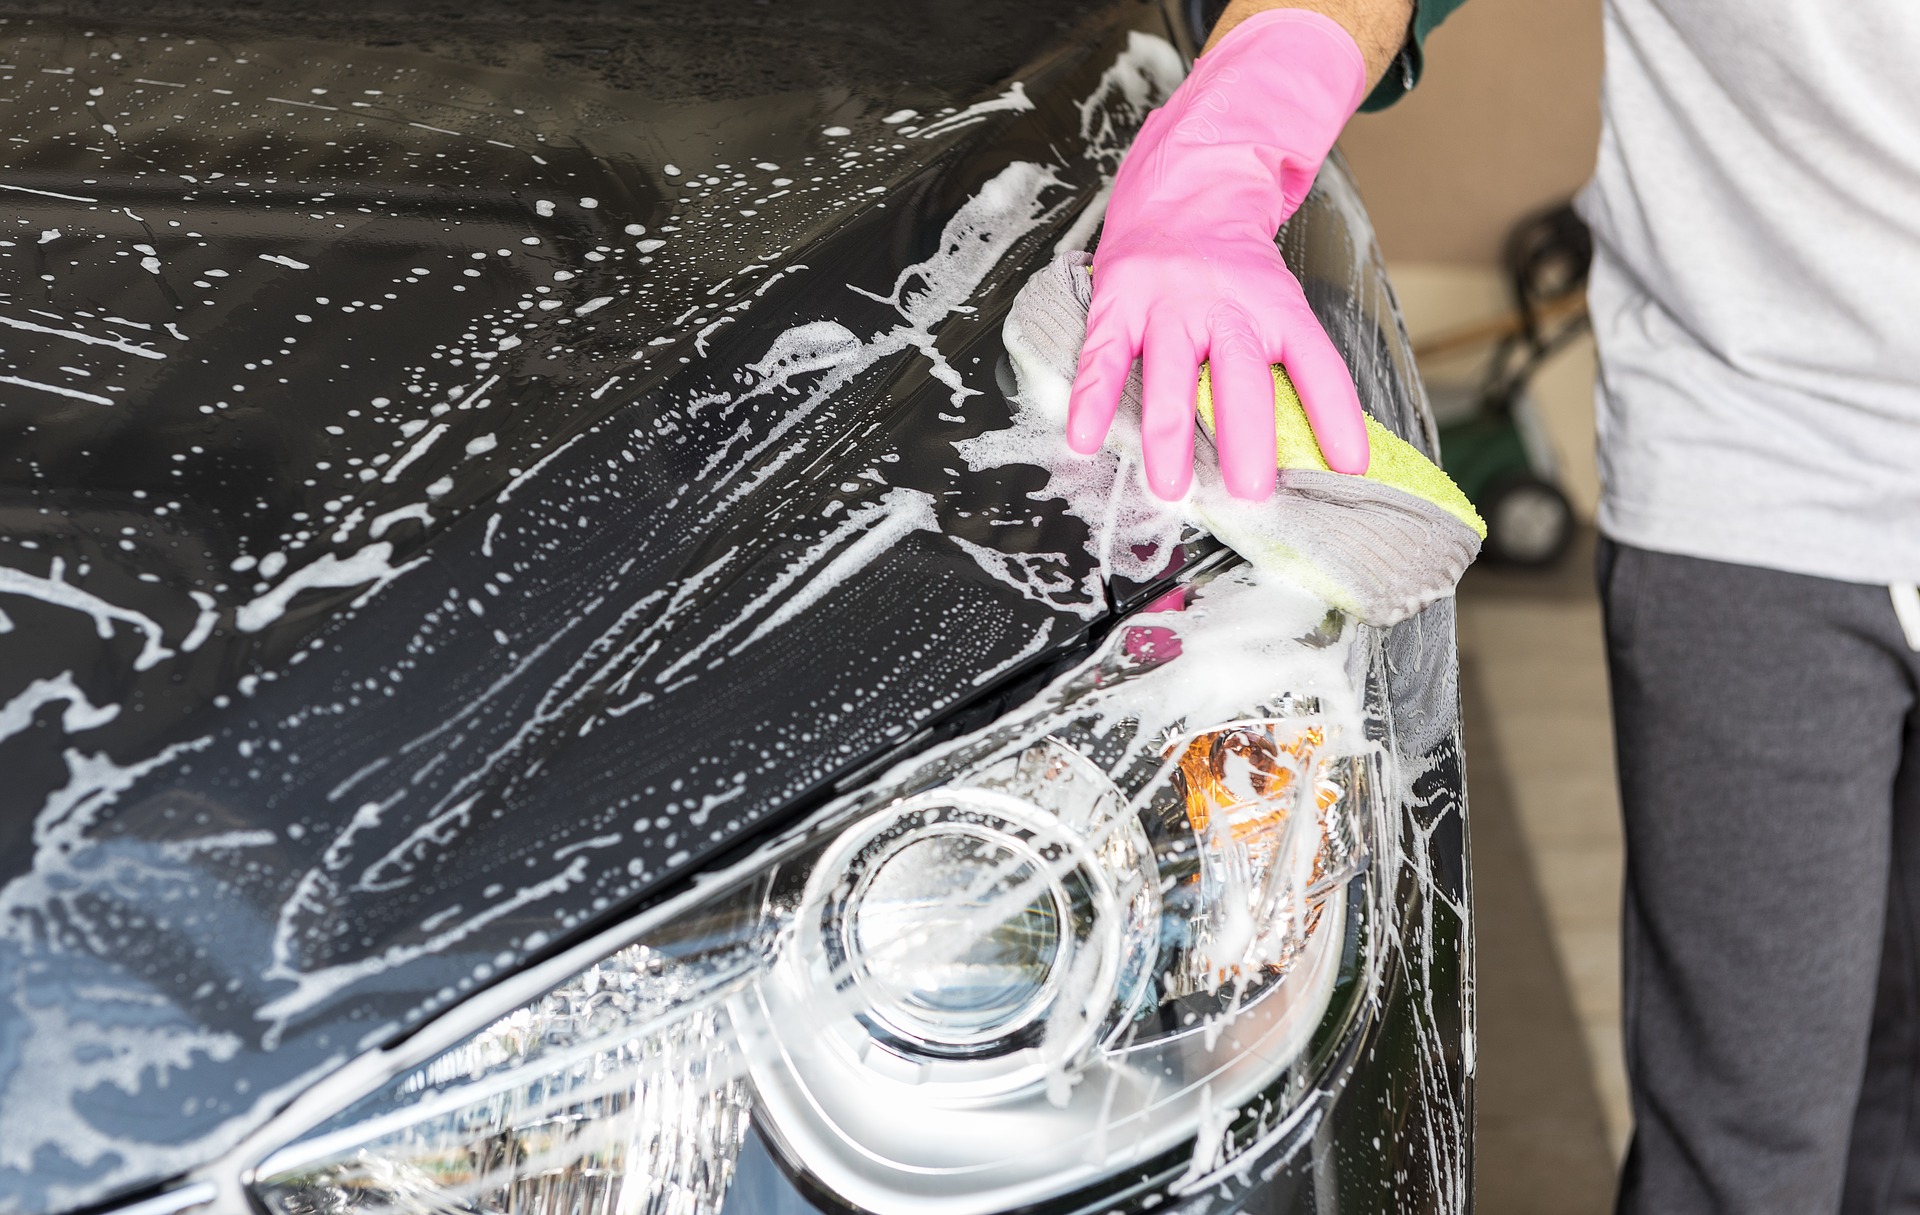 Hartje Tire and Service - tips for spring cleaning your car